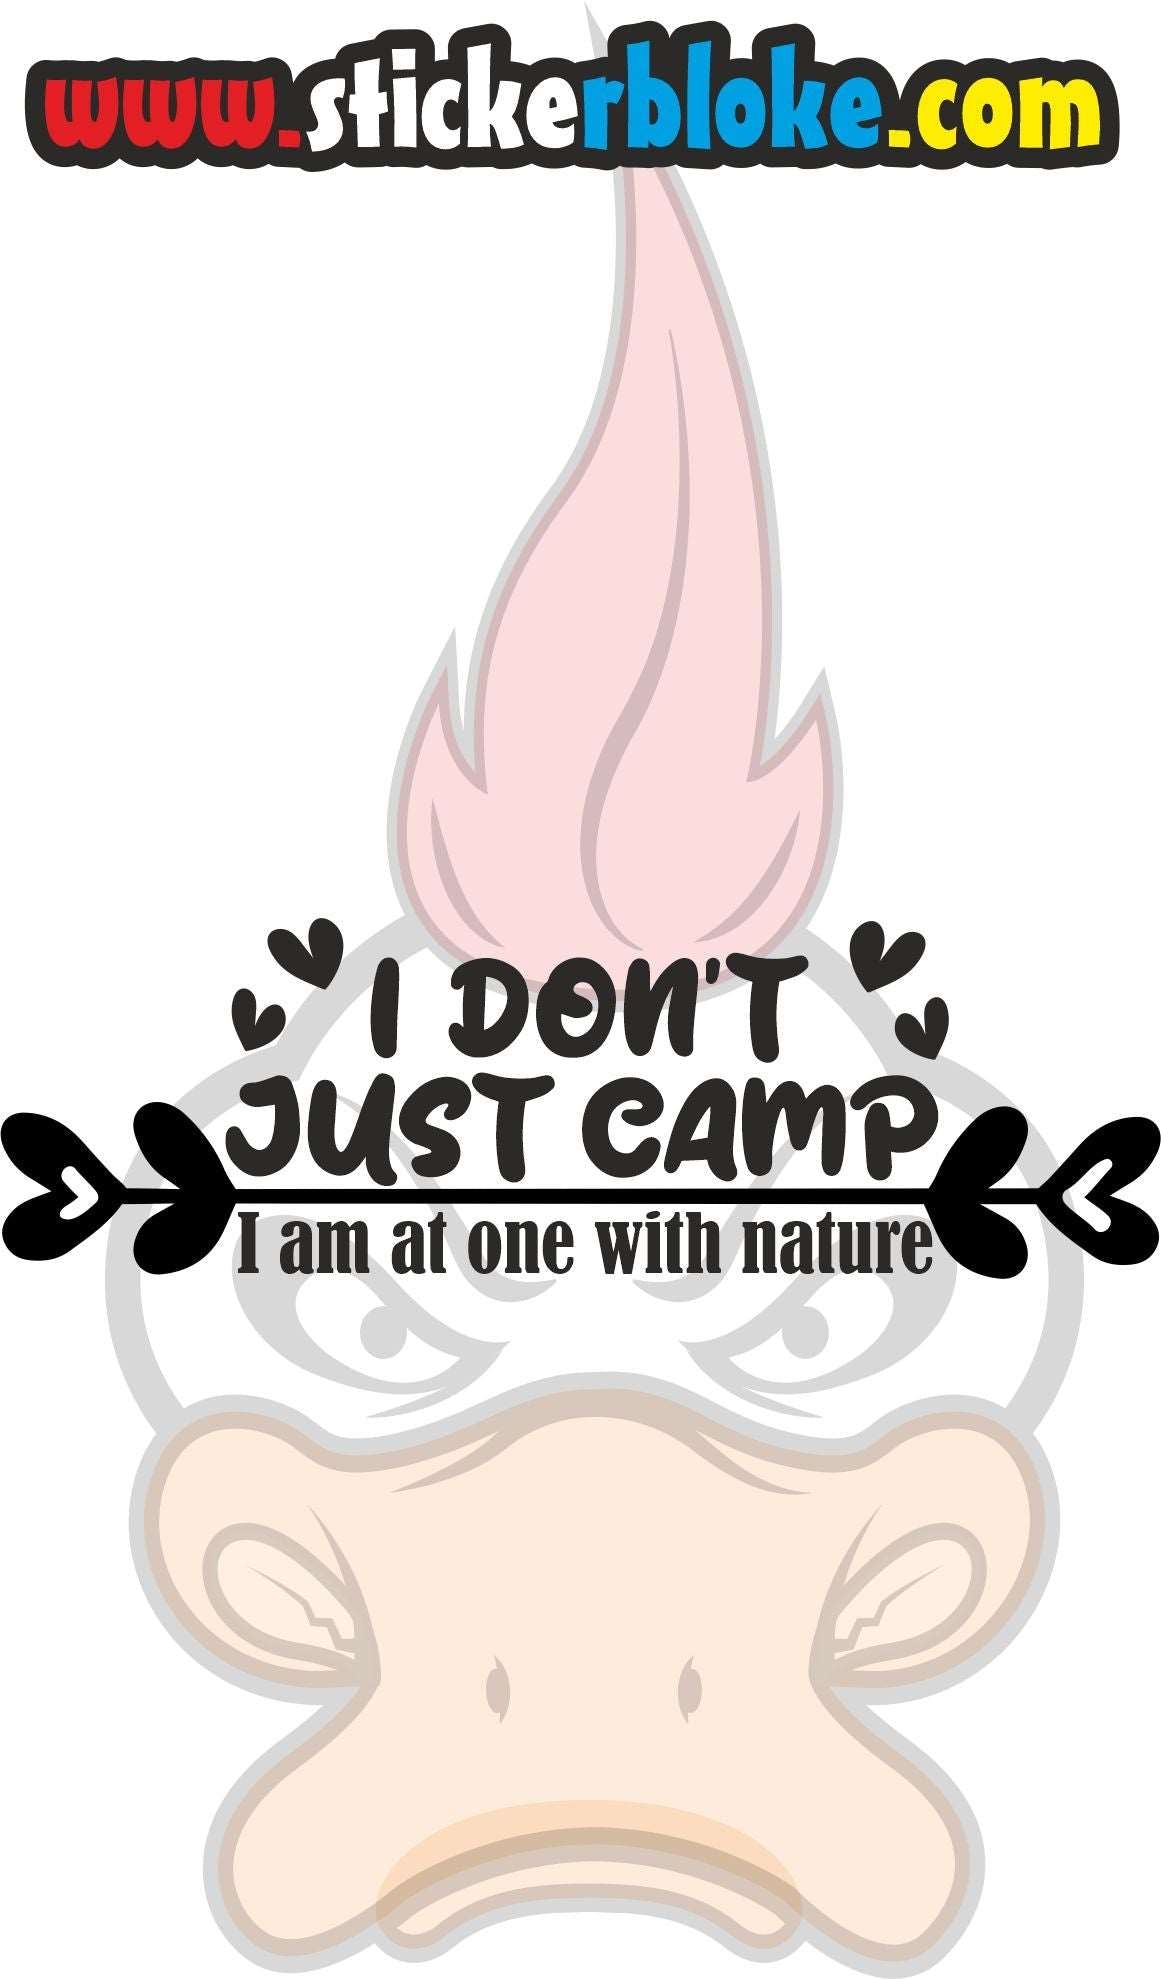 I DONT JUST CAMP I AM AT ONE WITH NATURE STICKER